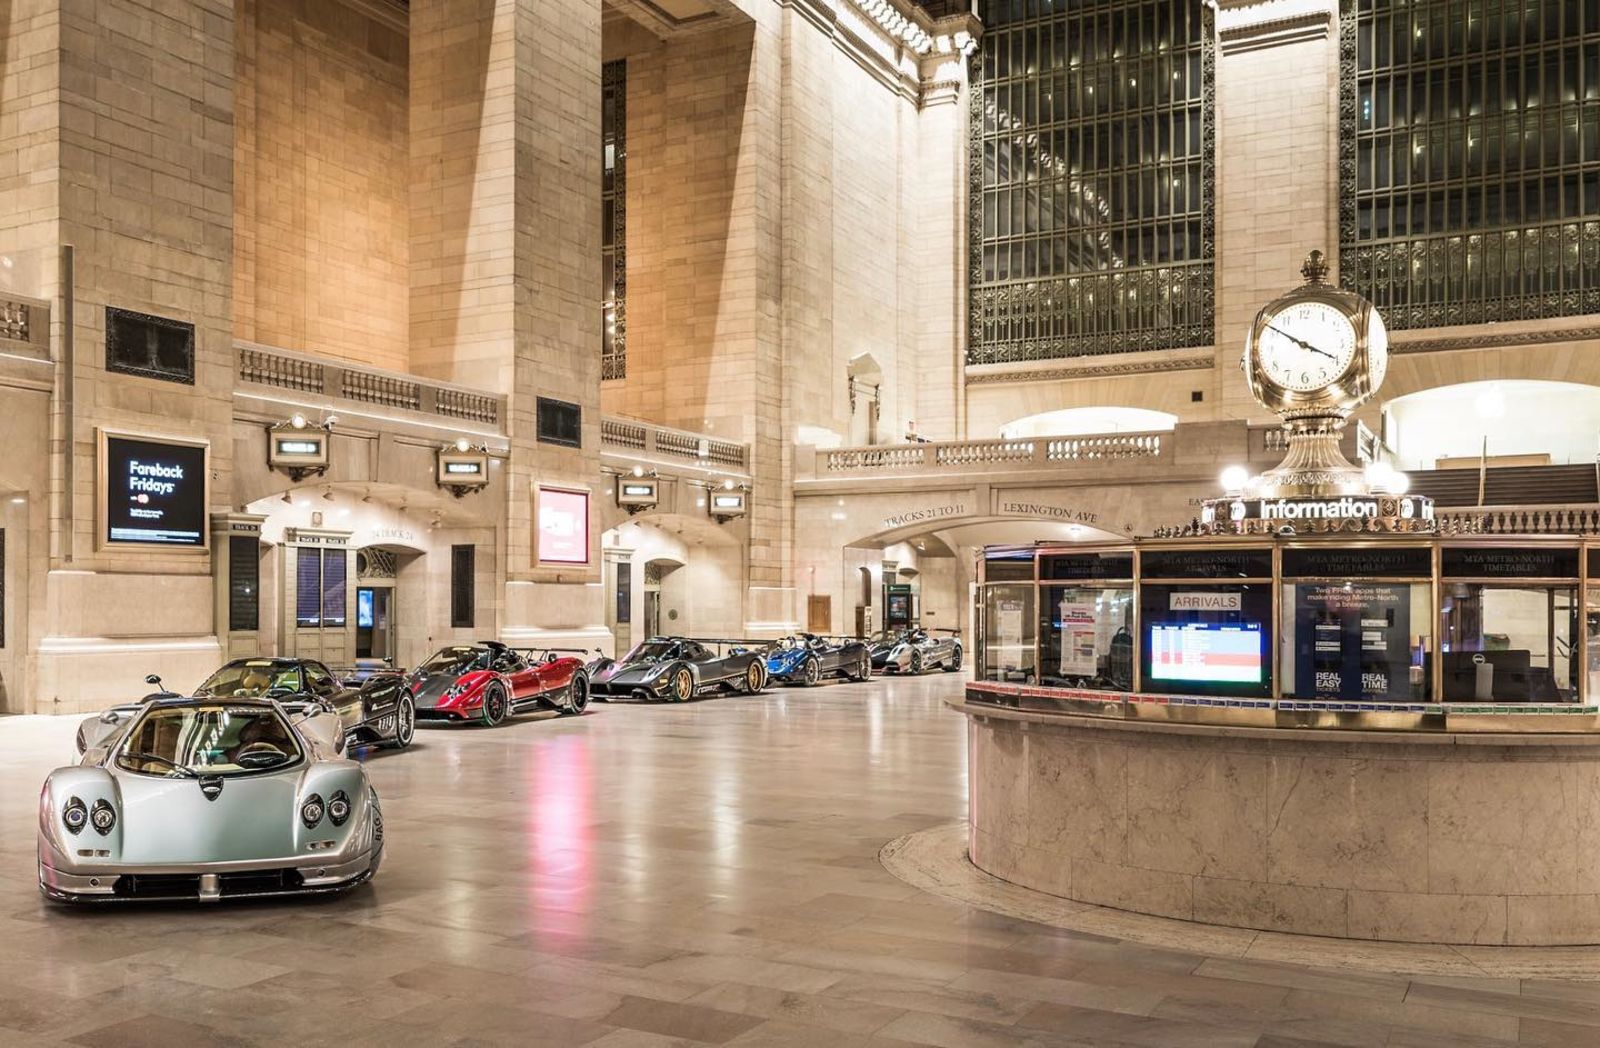 Illustration for article titled There’s $27M worth of Pagani on display in Grand Central!